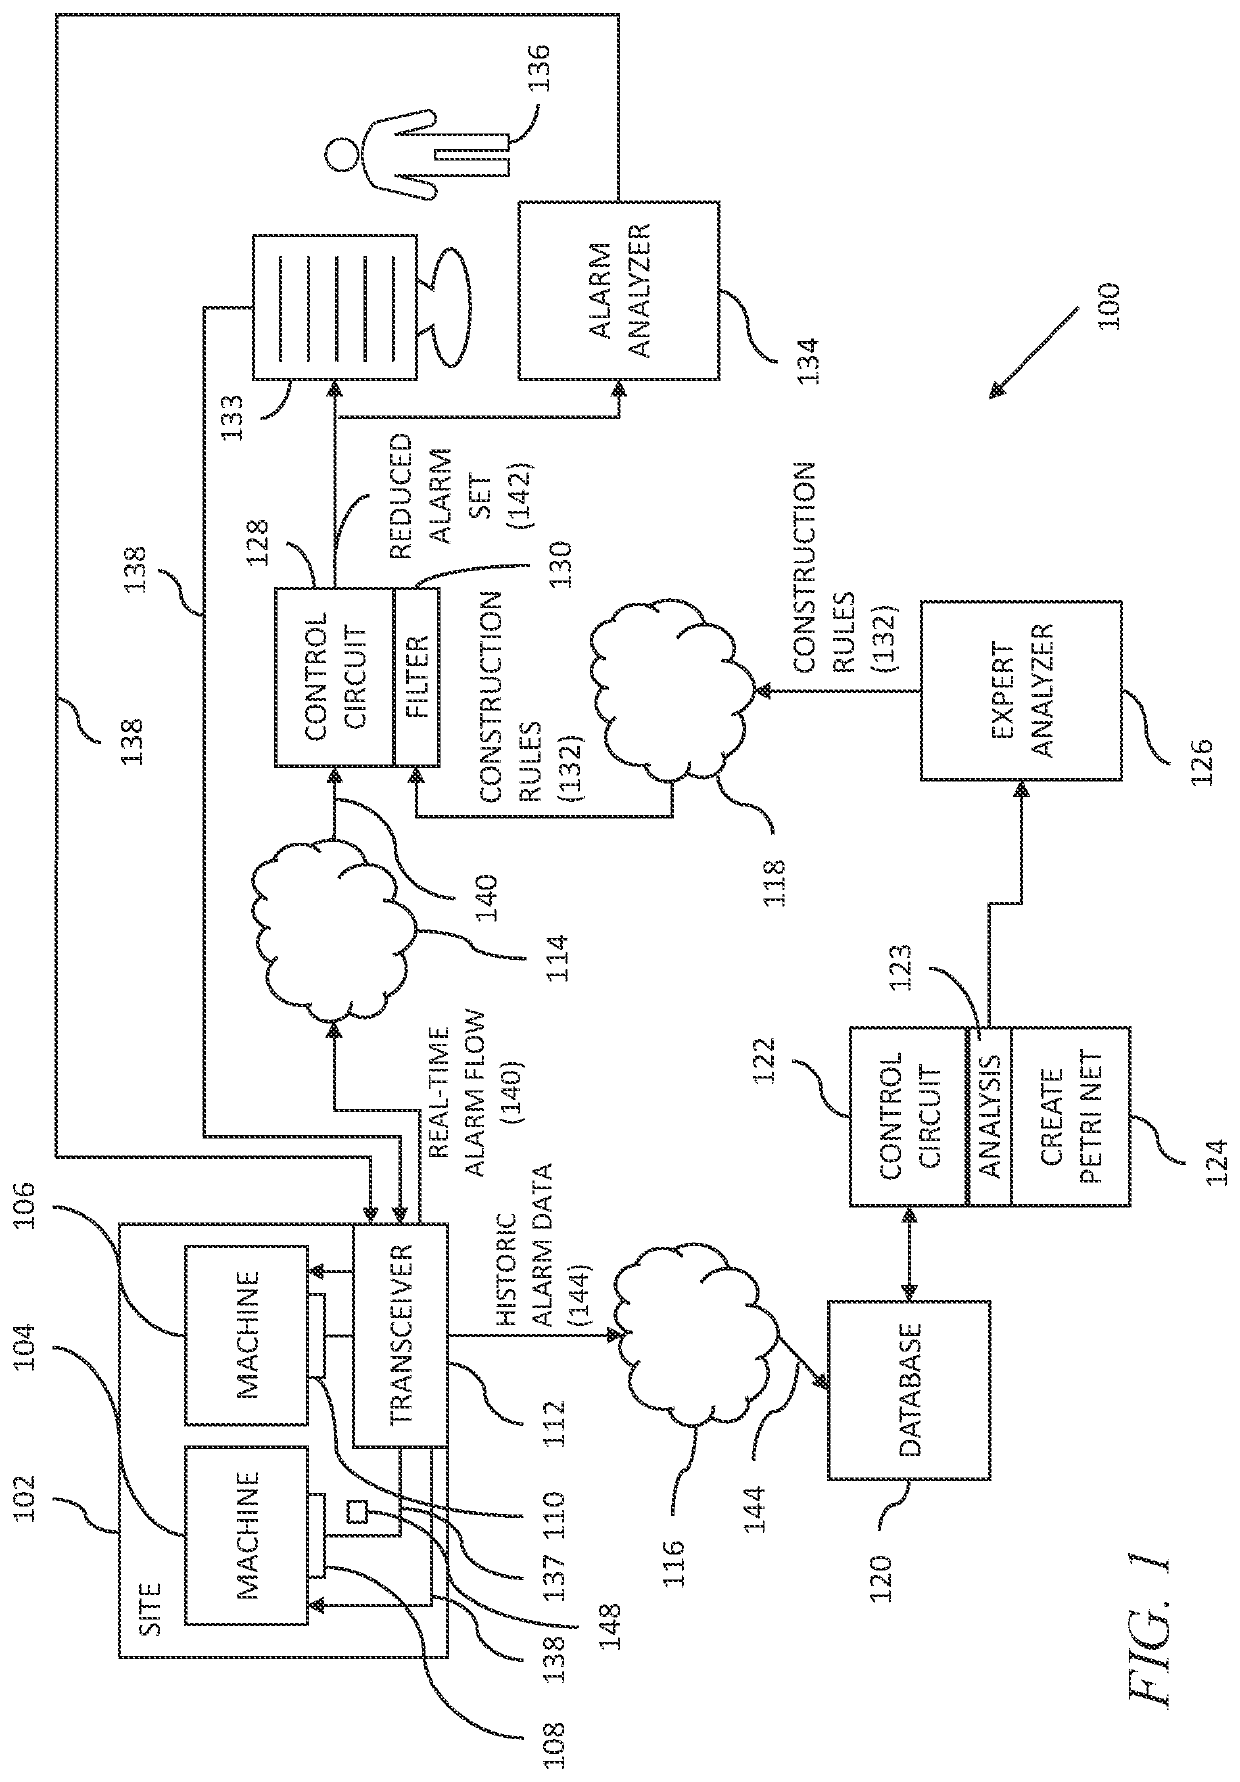 Apparatus and method for alarm management